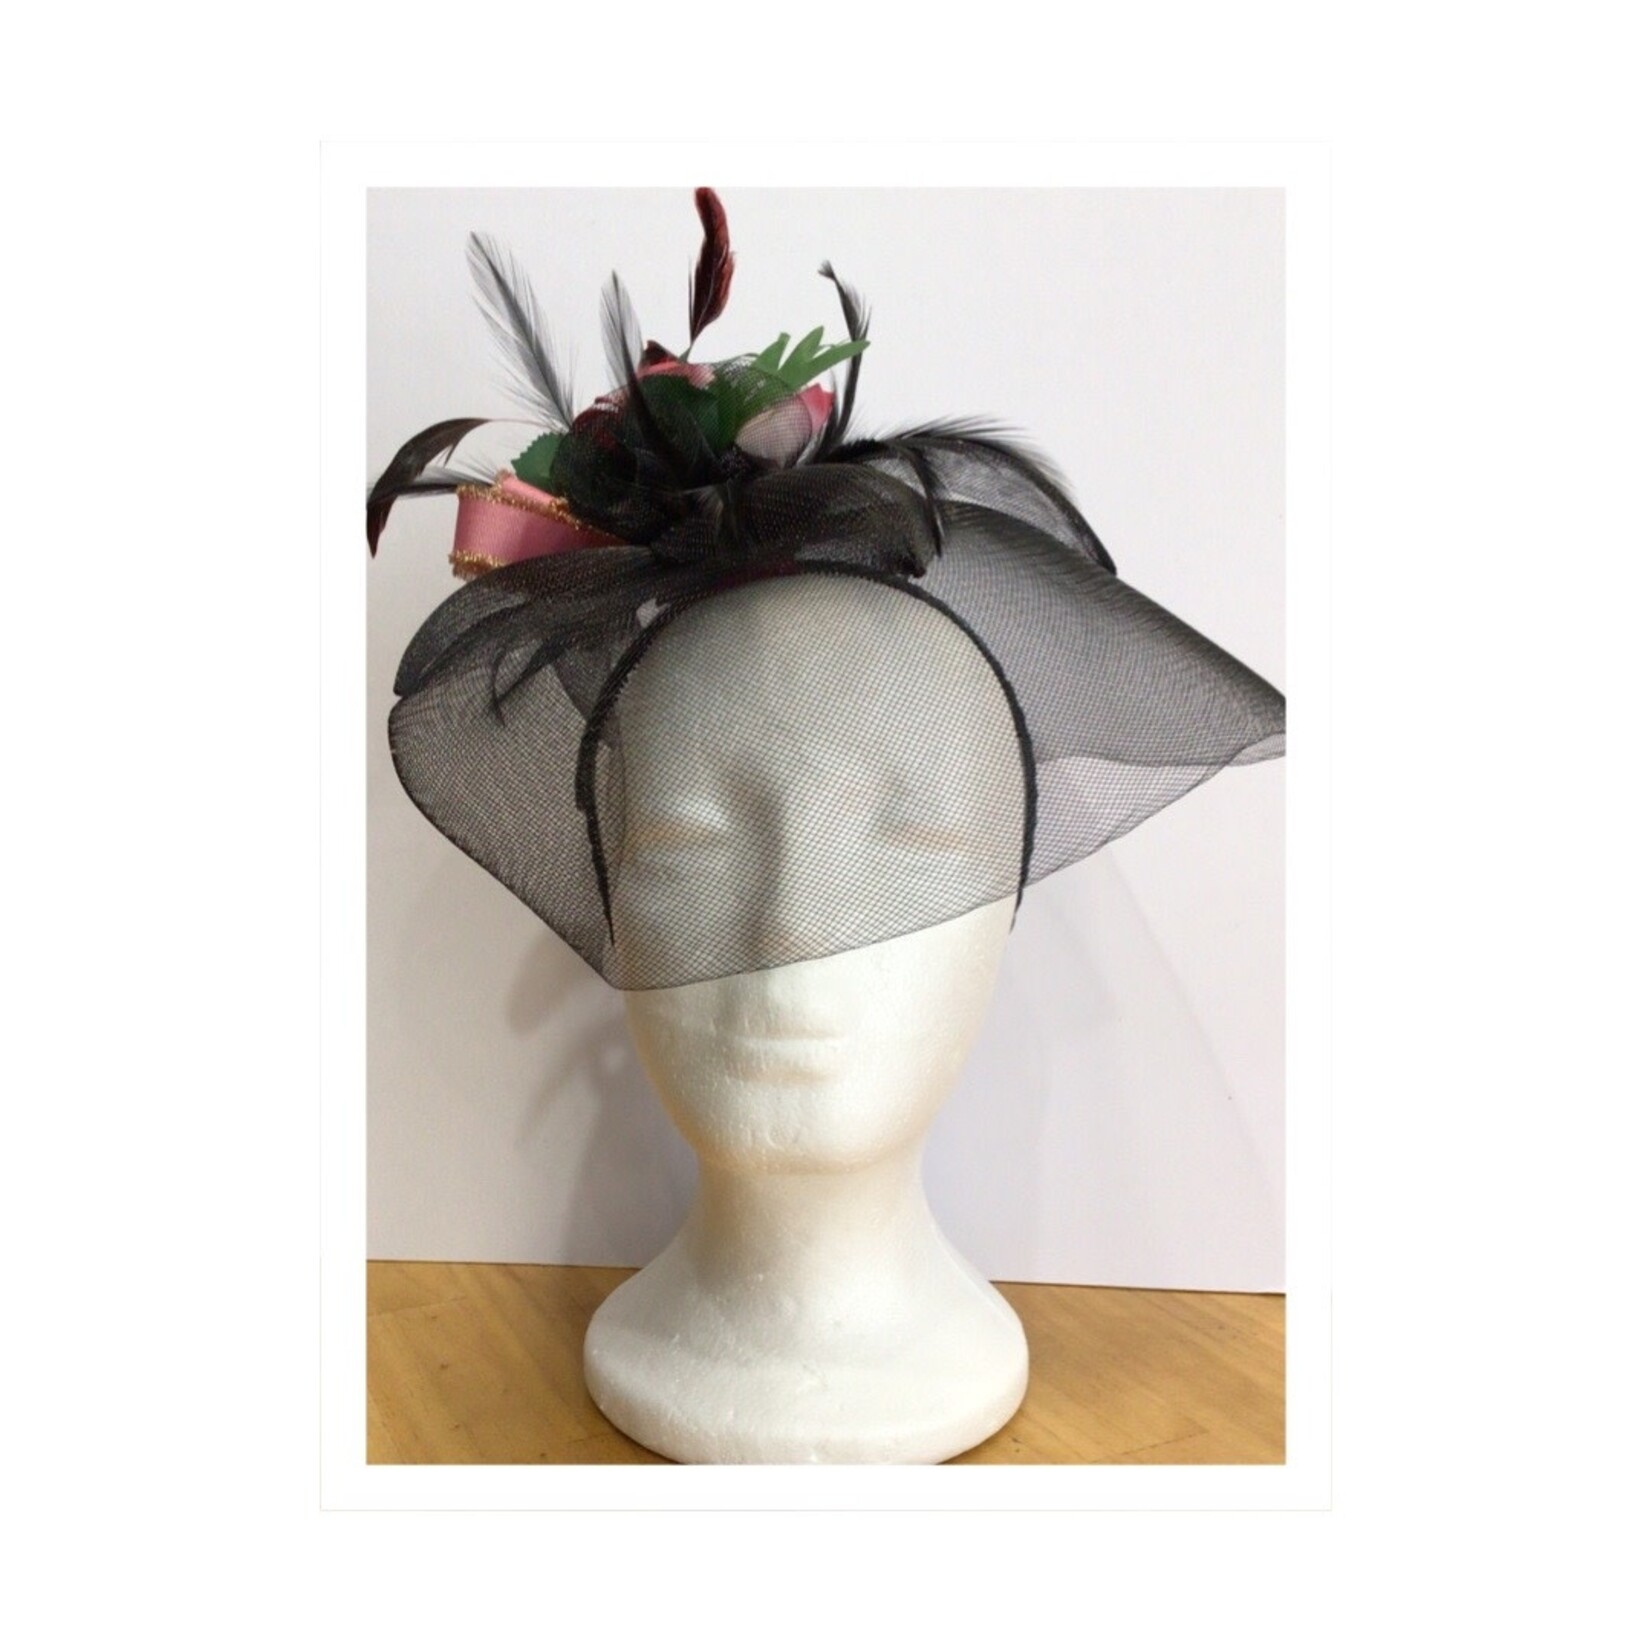 OPO Black w/Pink Flowers Feather Hat Fascinator